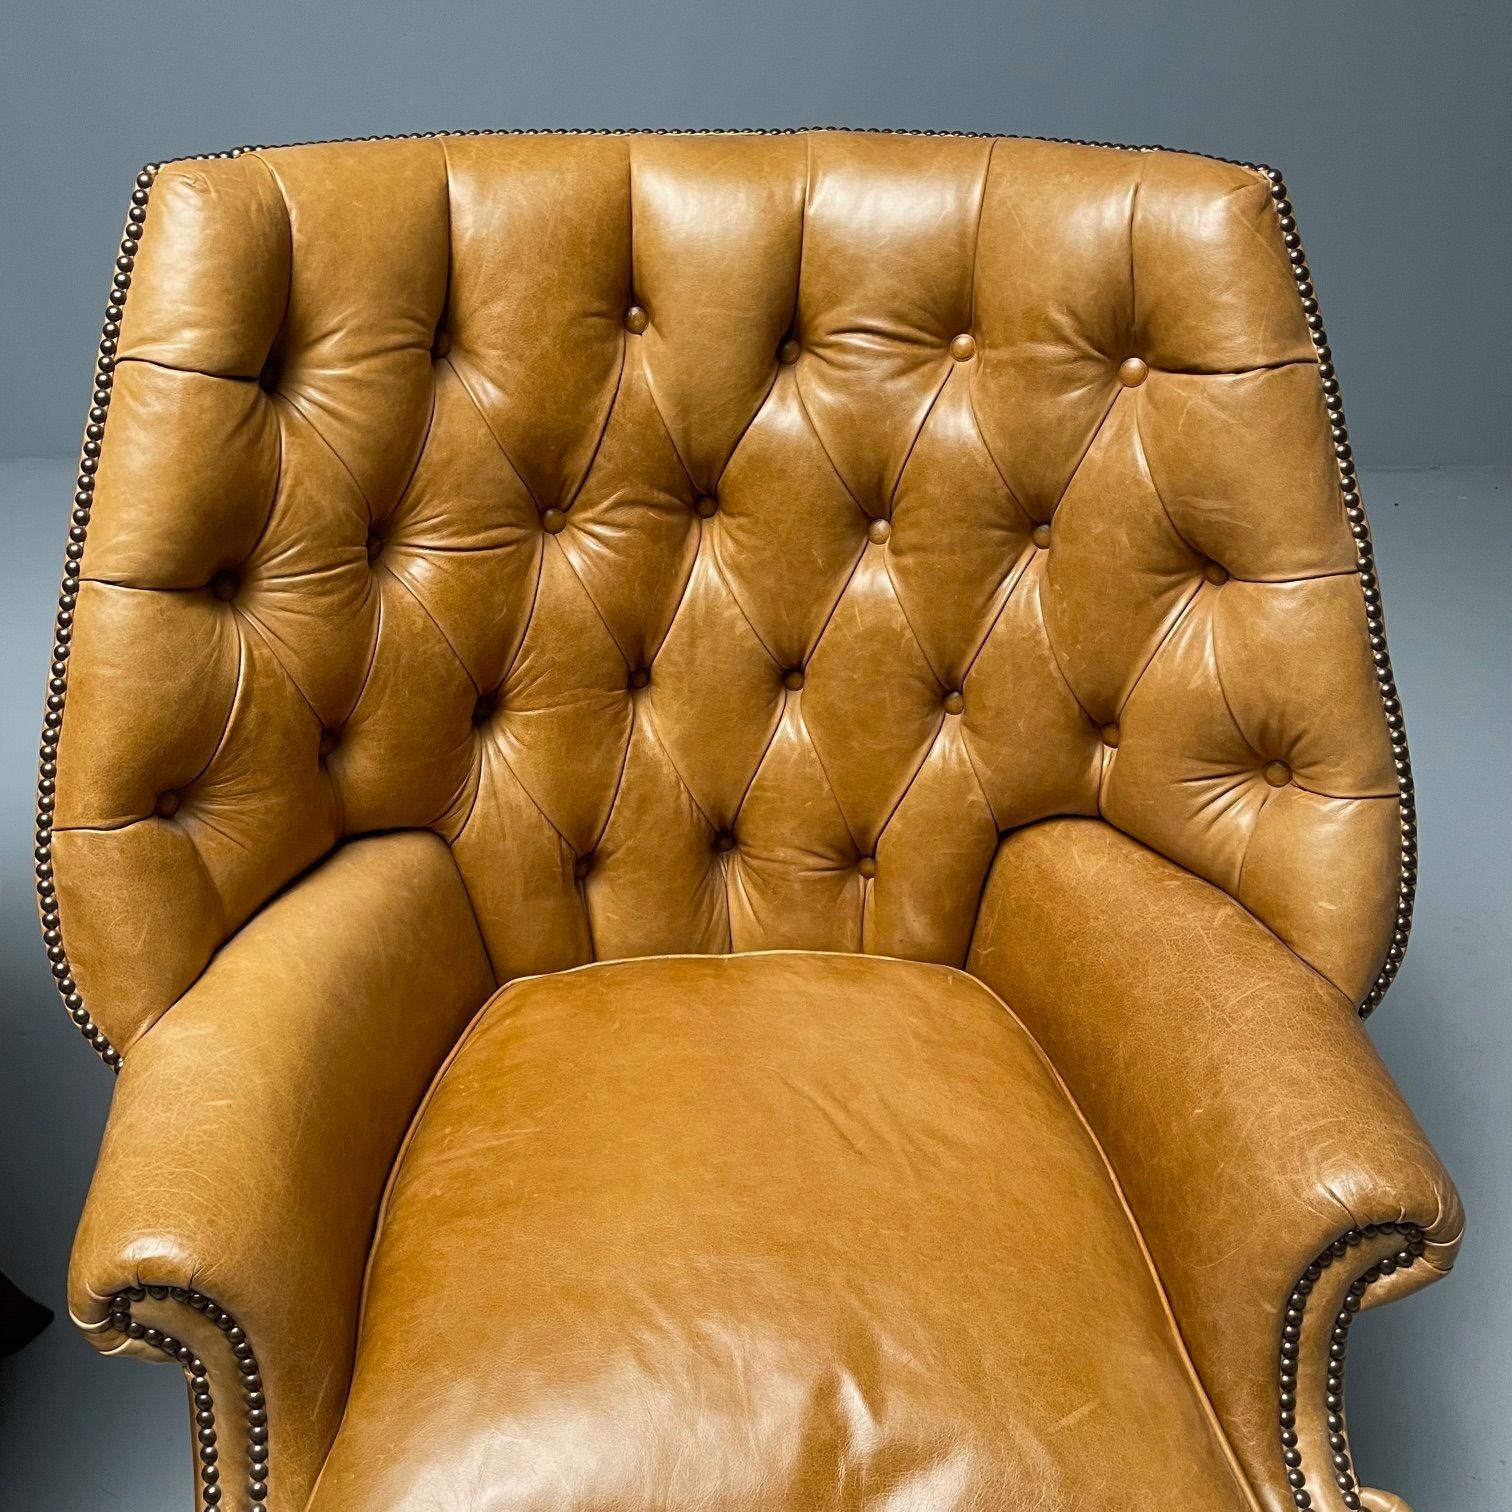 Georgian, Large Tufted Lounge Chairs and Ottomans, Tan Leather, USA, 2000s For Sale 8